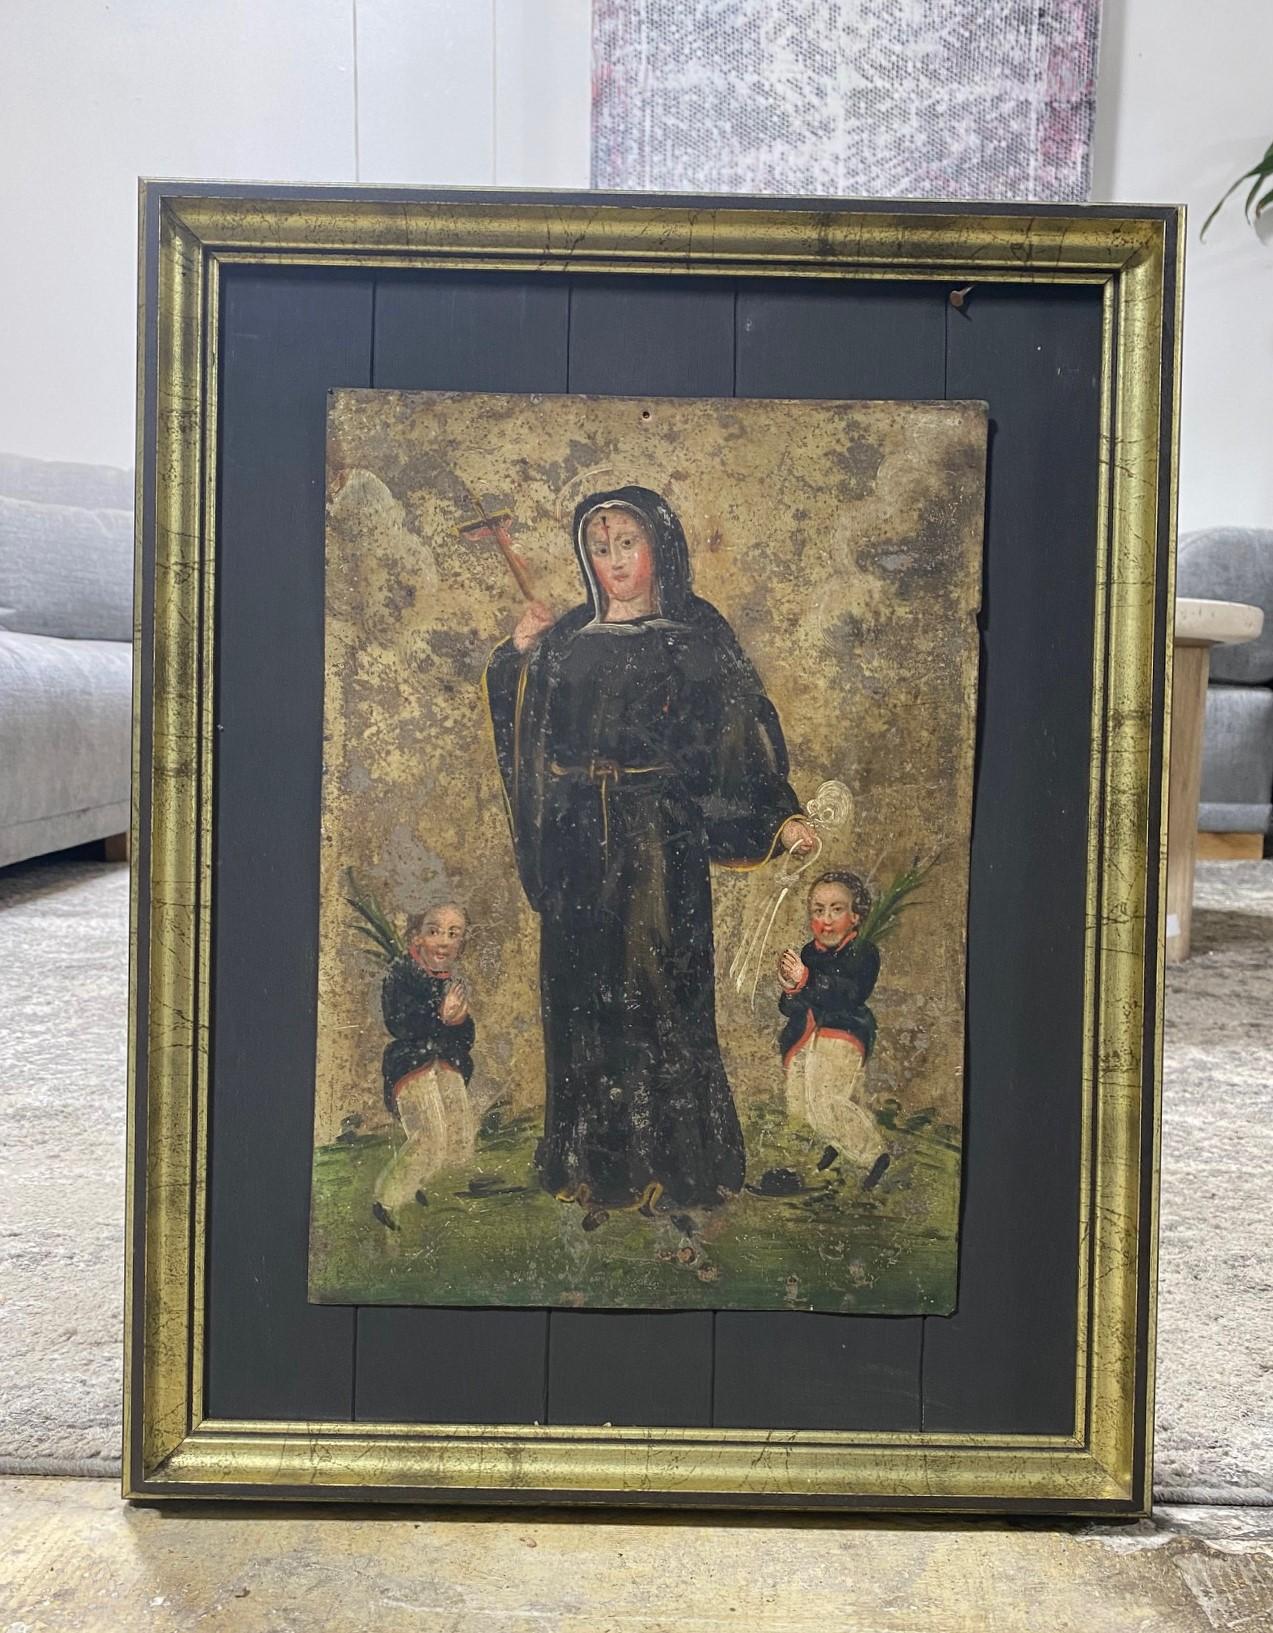 A beautiful 19th century Spanish Colonial Mexican Folk Art ex-voto retablo lámina painting featuring Saint Rita De Cascia. Santa Rita is almost always depicted as she is here, with a trickle of blood and a thorn deeply embedded in her forehead.